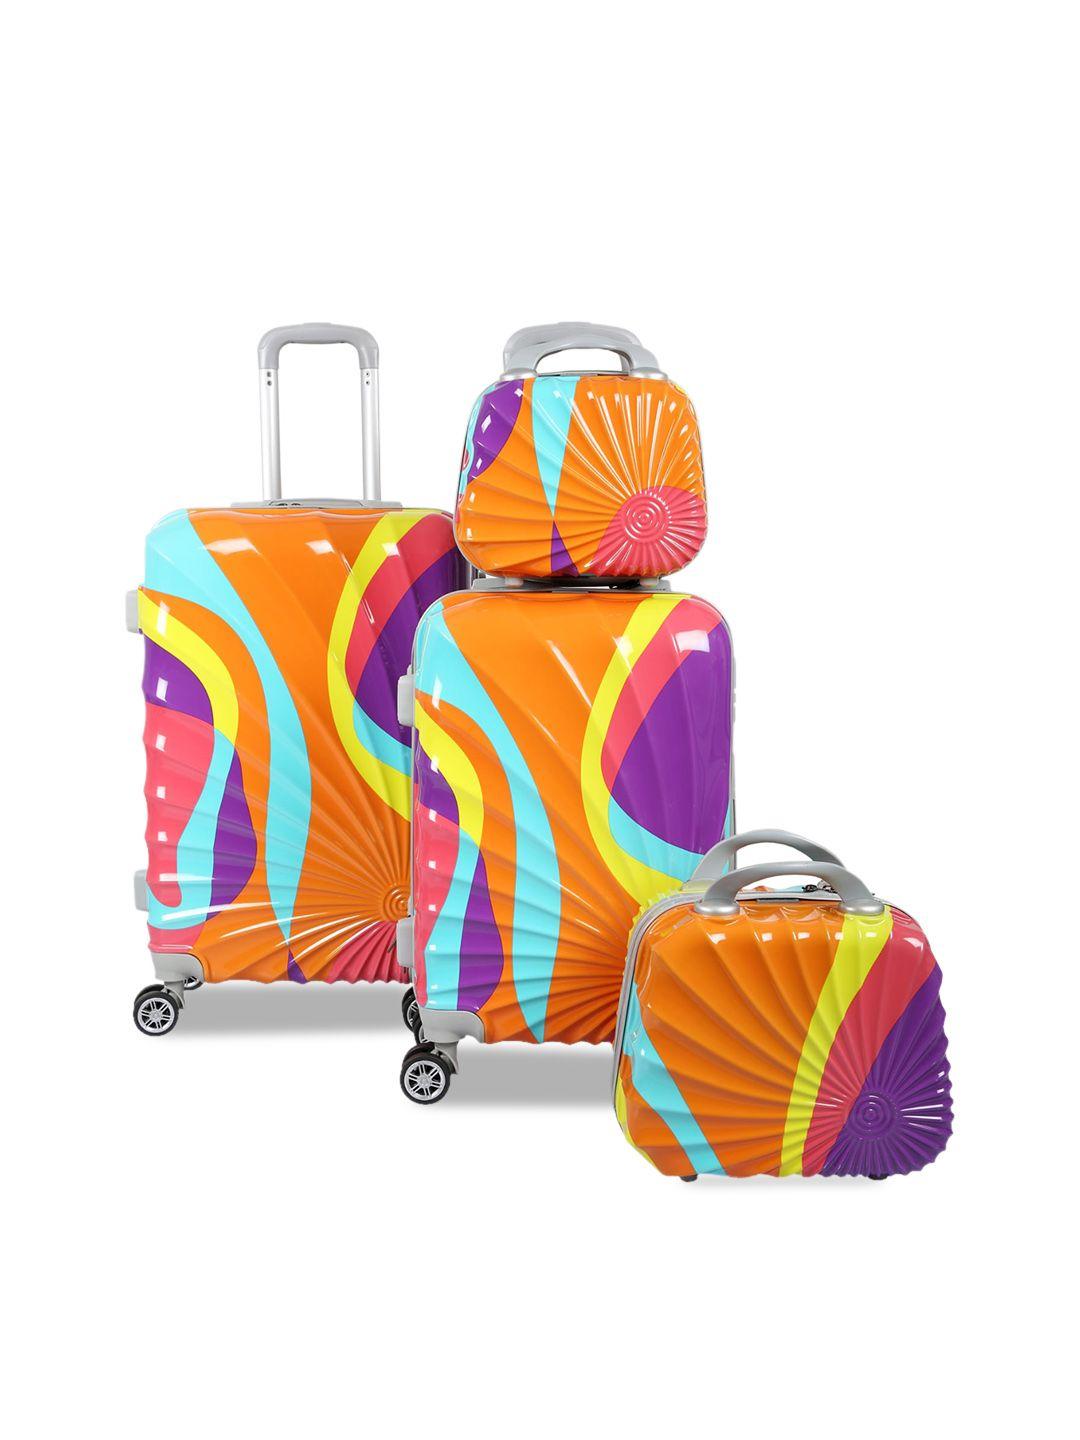 polo class set of 2 multicolour travel trolley bag with  2 vanity bag